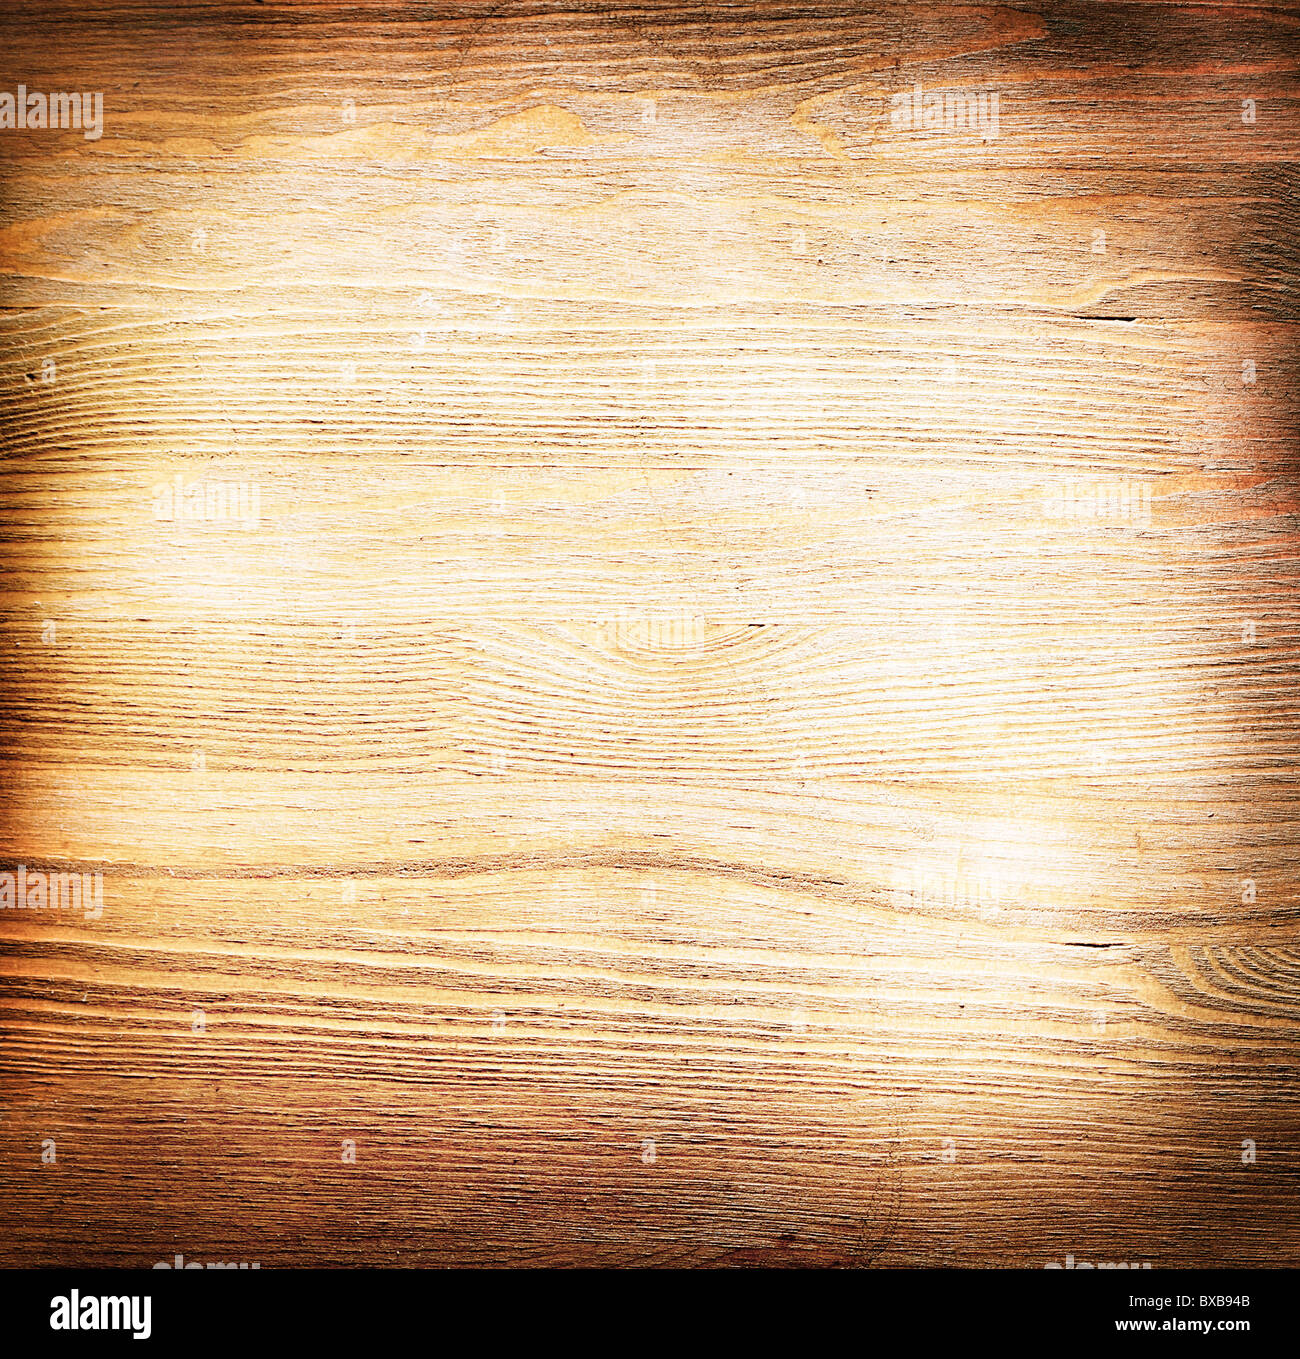 Image of background in the form of an old wooden surface Stock Photo